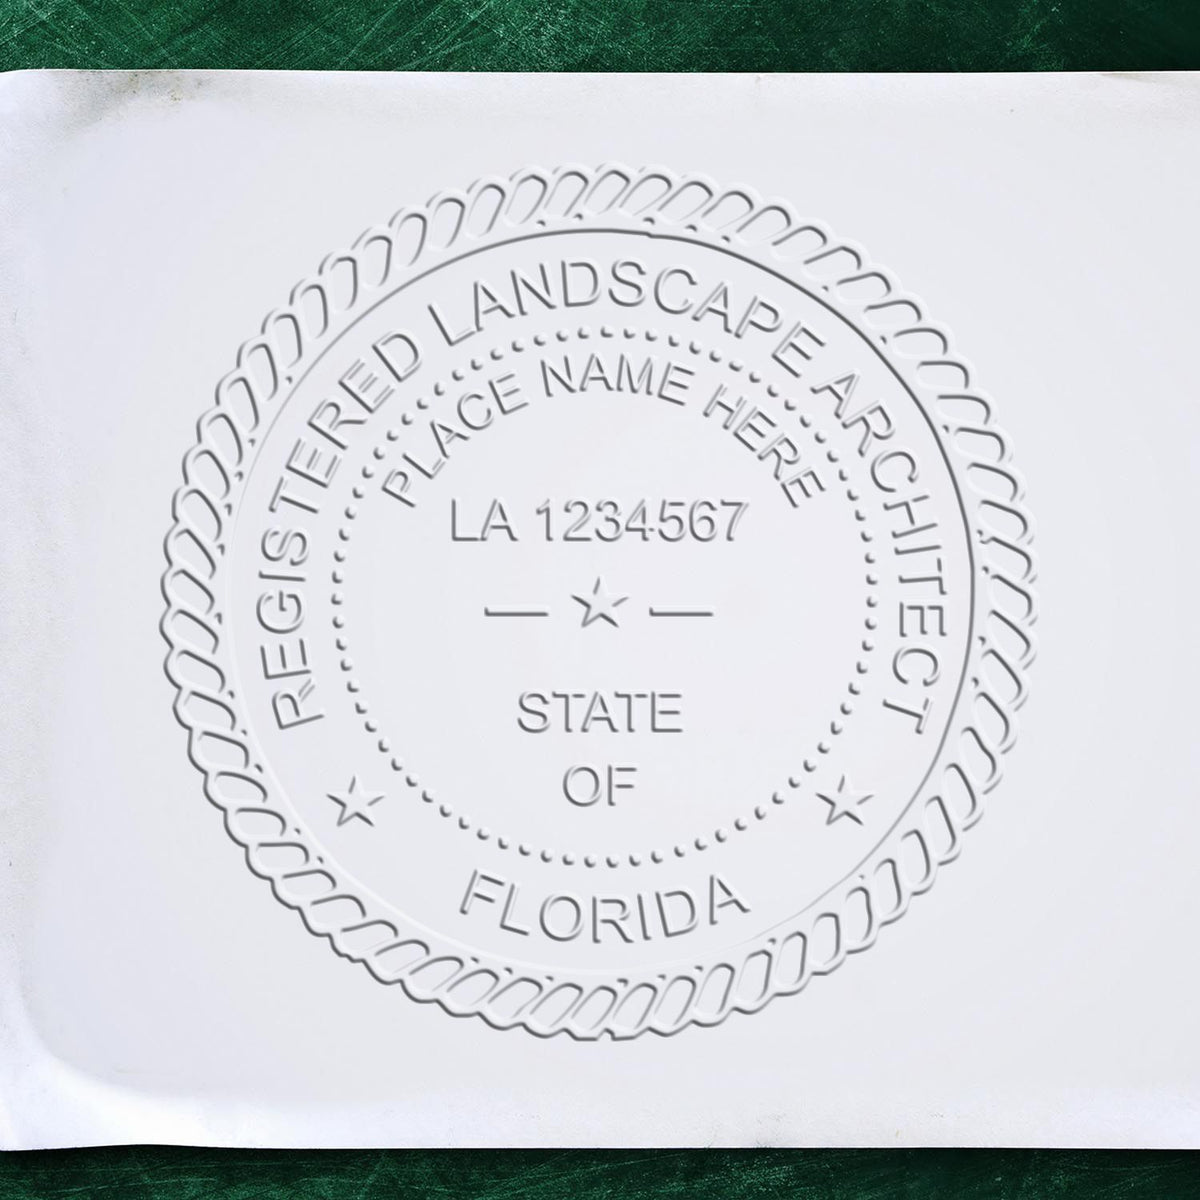 An in use photo of the Hybrid Florida Landscape Architect Seal showing a sample imprint on a cardstock